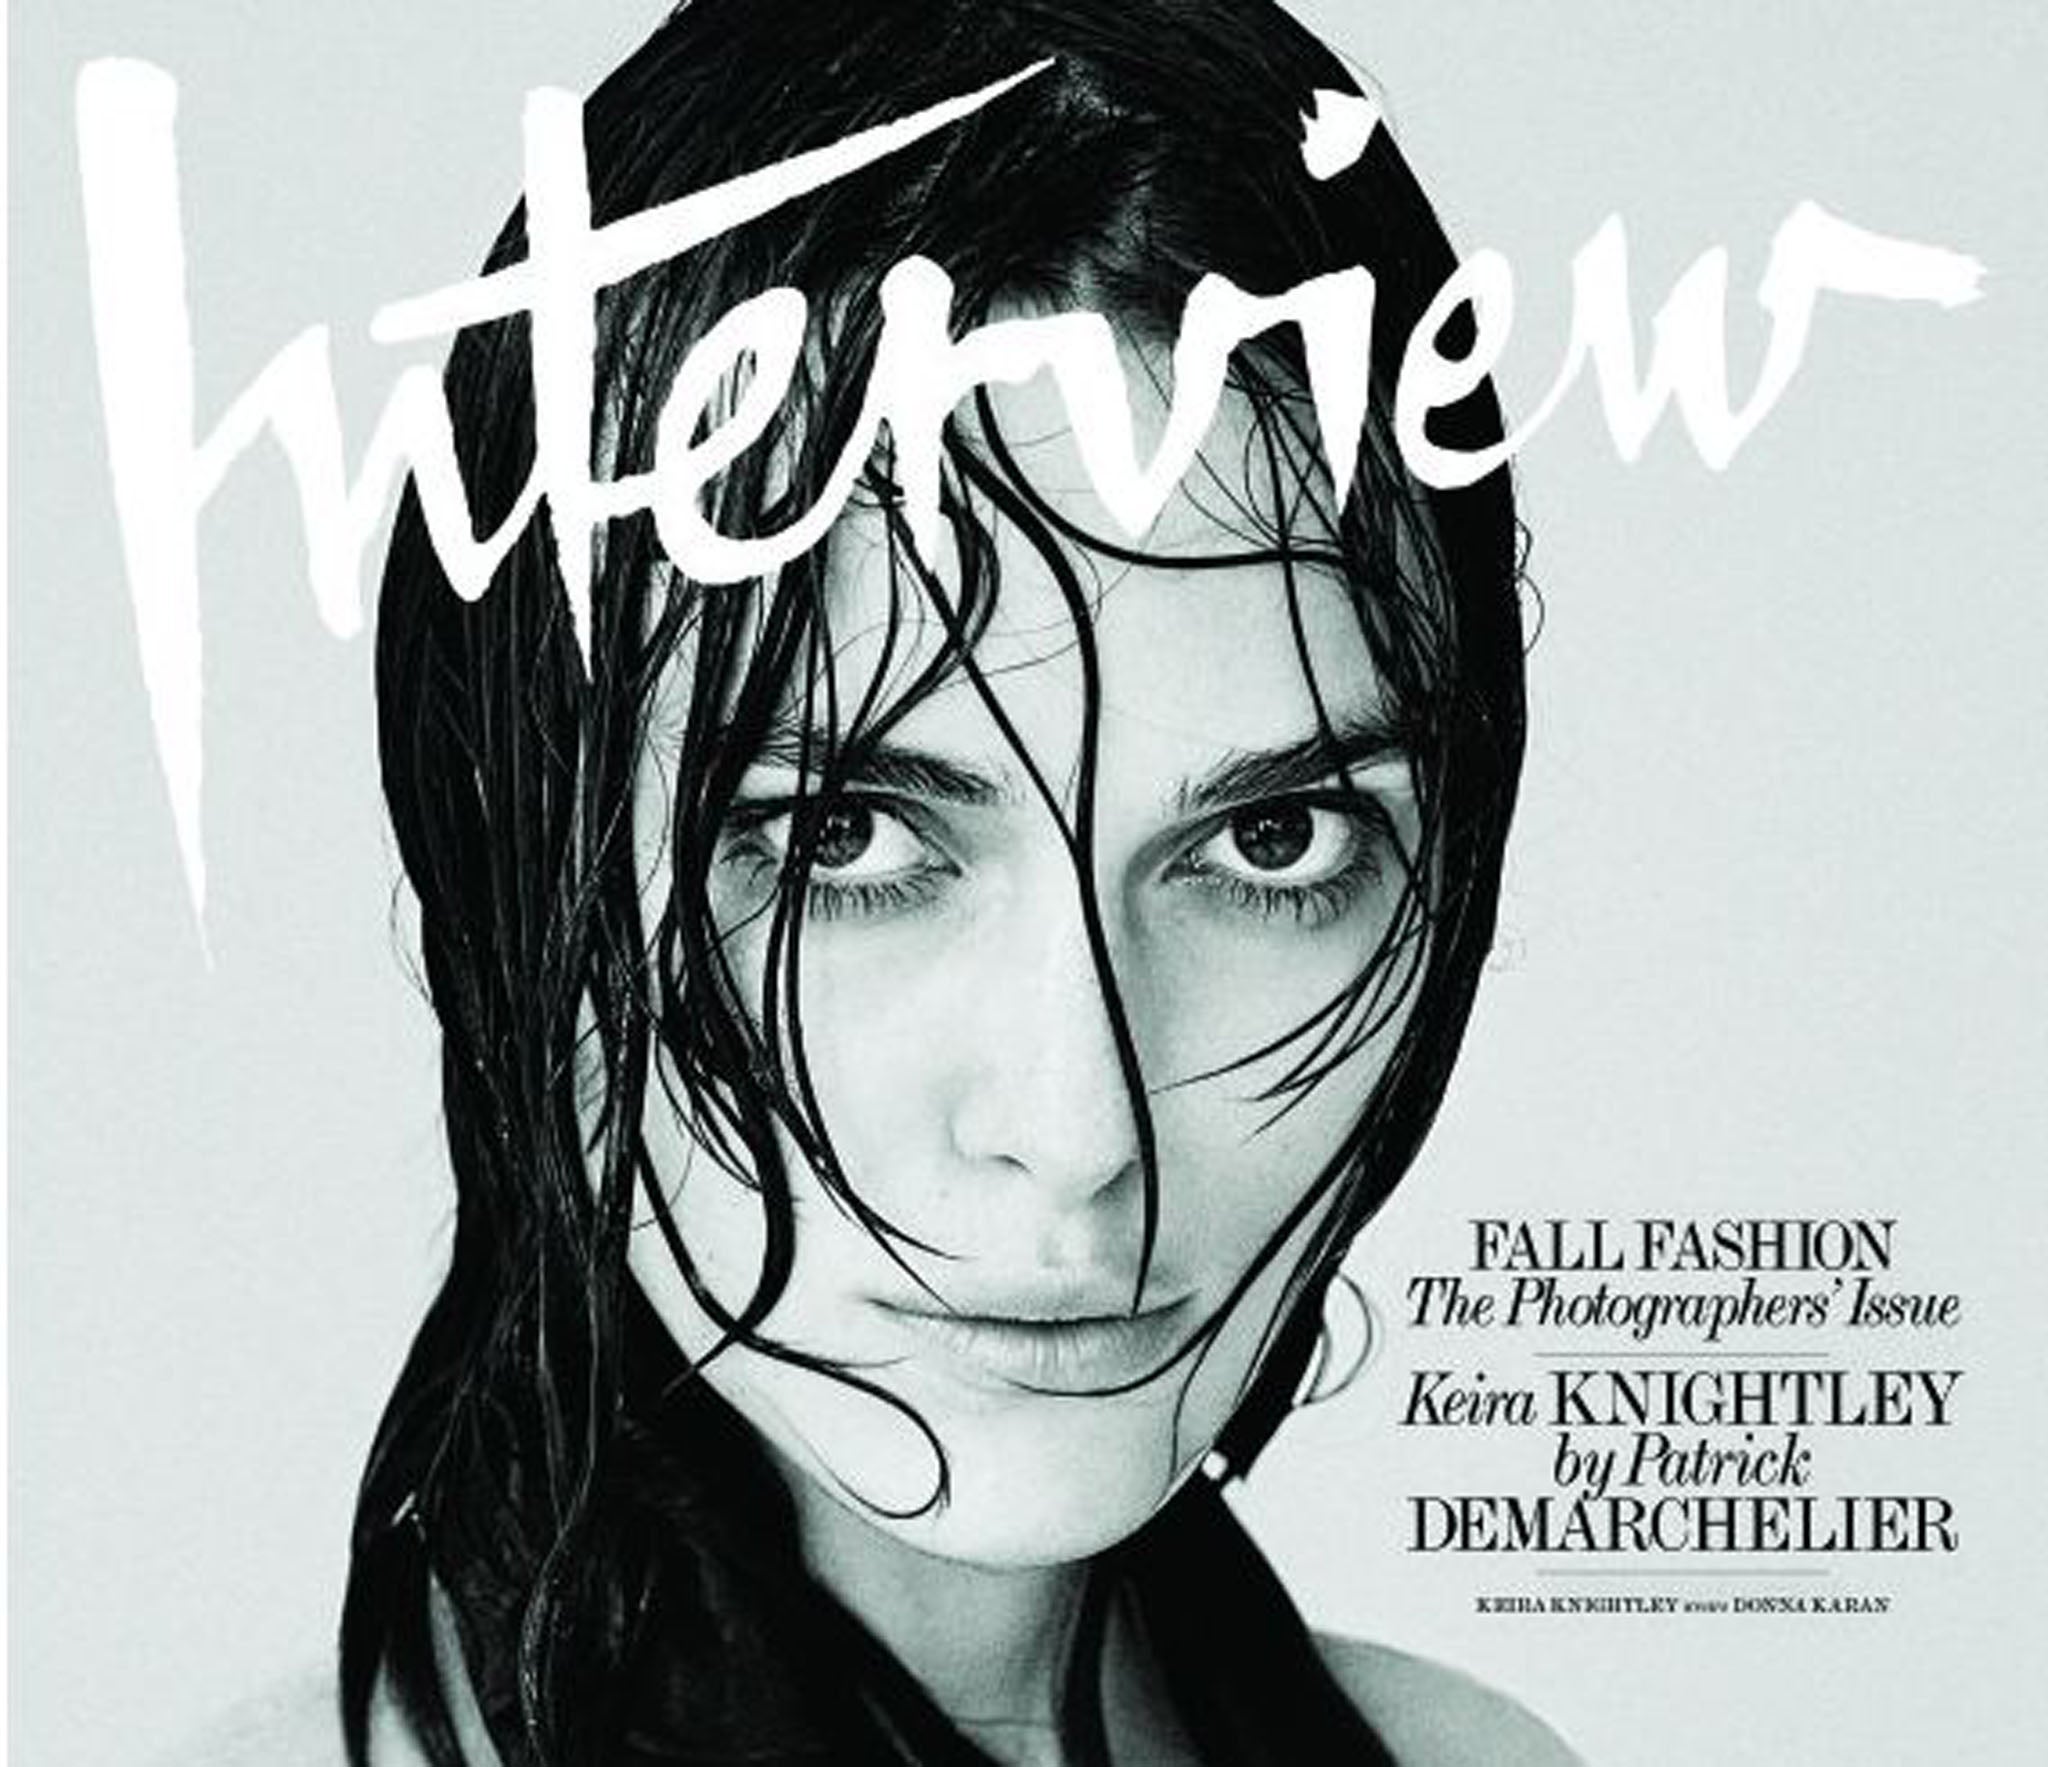 Keira Knightley on the cover of Interview Magazine's September 2014 issue